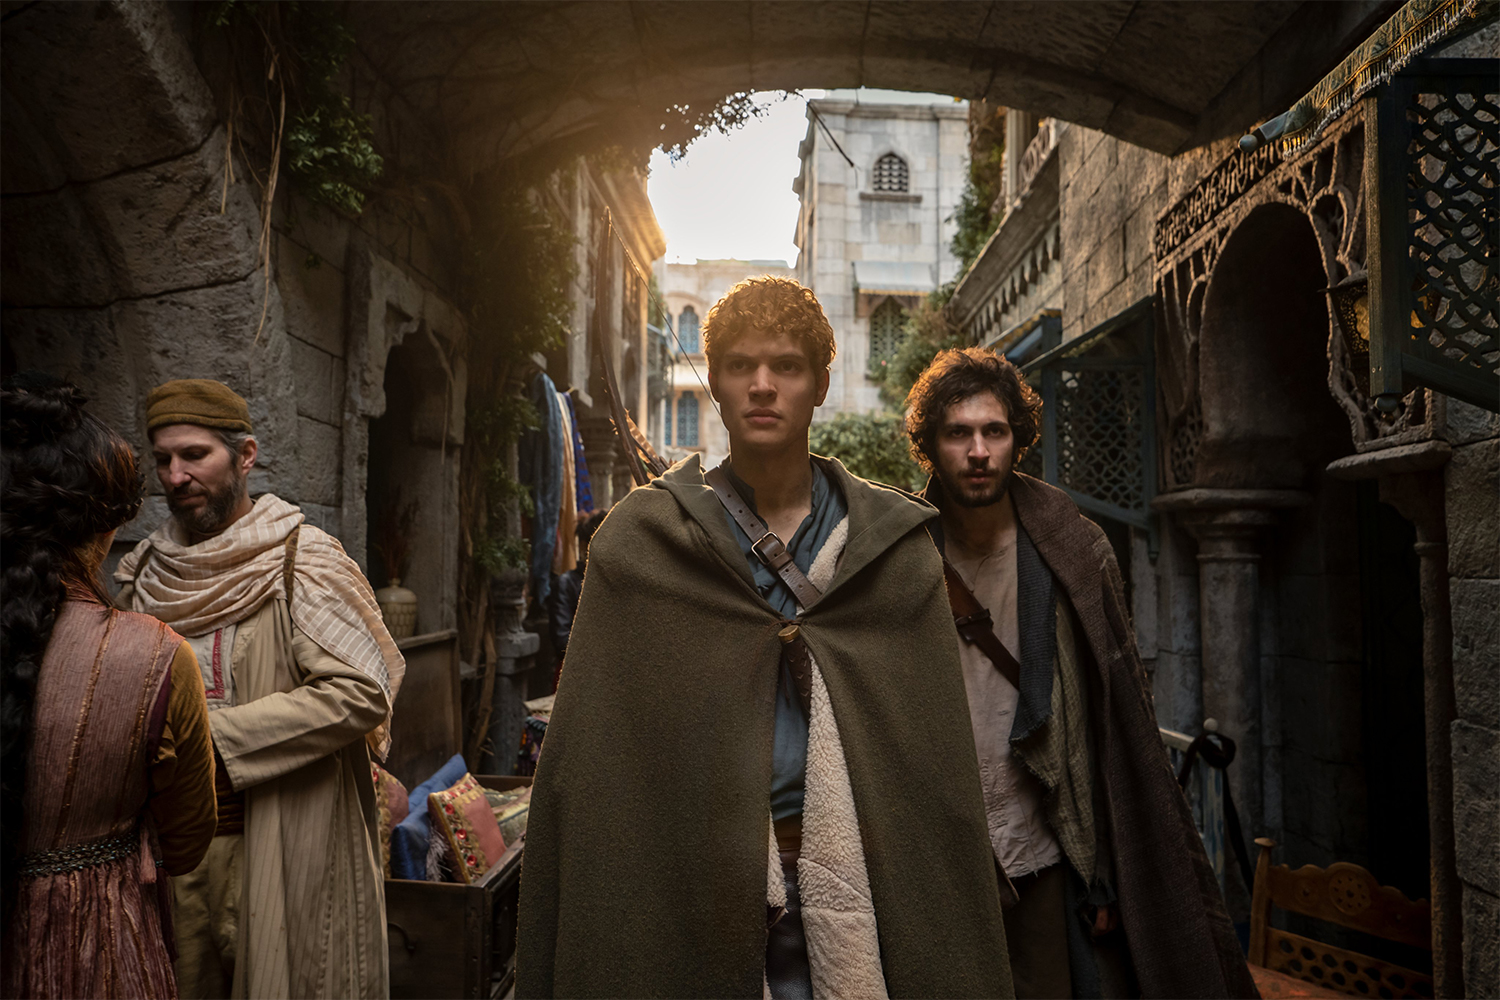 Josha Stradowski (center, as Rand al'Thor) and Barney Harris (right, as Mat Cauthon) in the first season of the Amazon Prime Video series "The Wheel of Time"